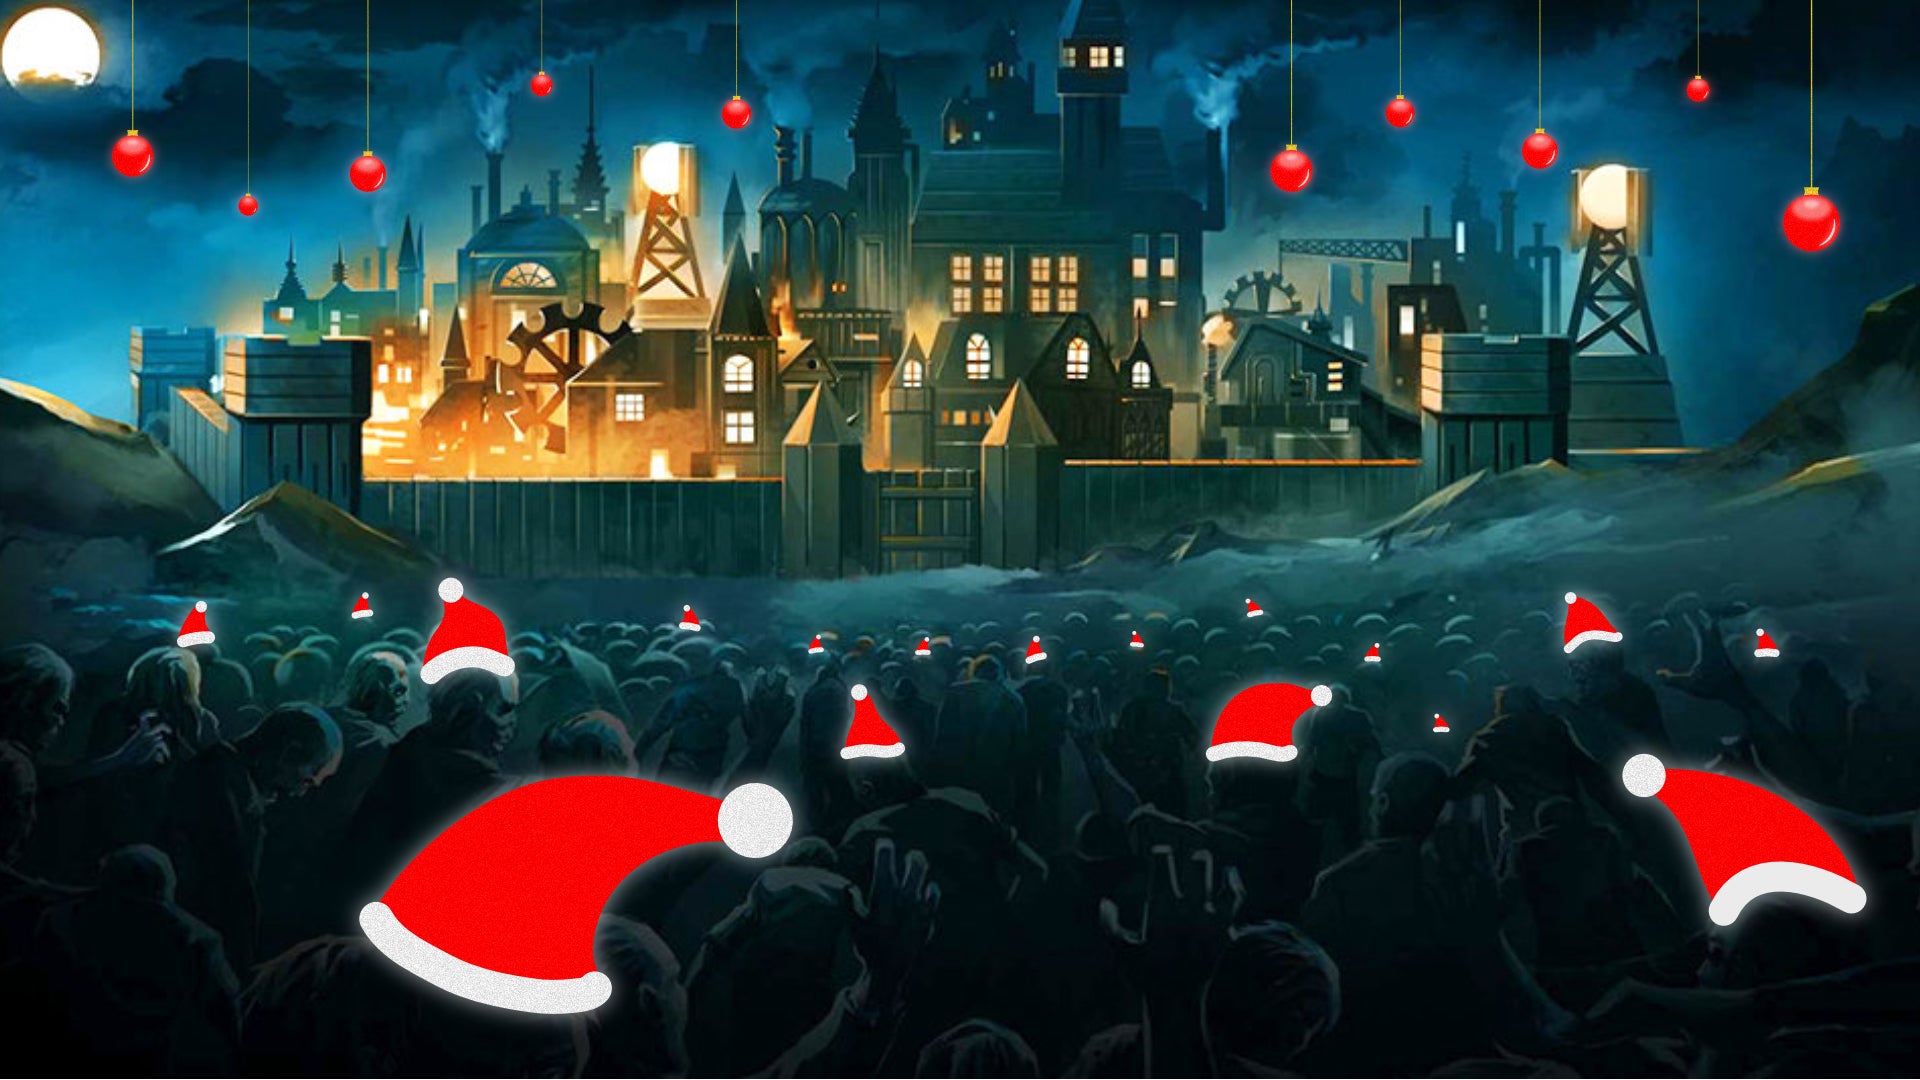 A horde of undead storms a town on the horizon in They Are Billions. Several zombies have been edited to be wearing Christmas hats, and Christmas baubles hang from the top of the image.